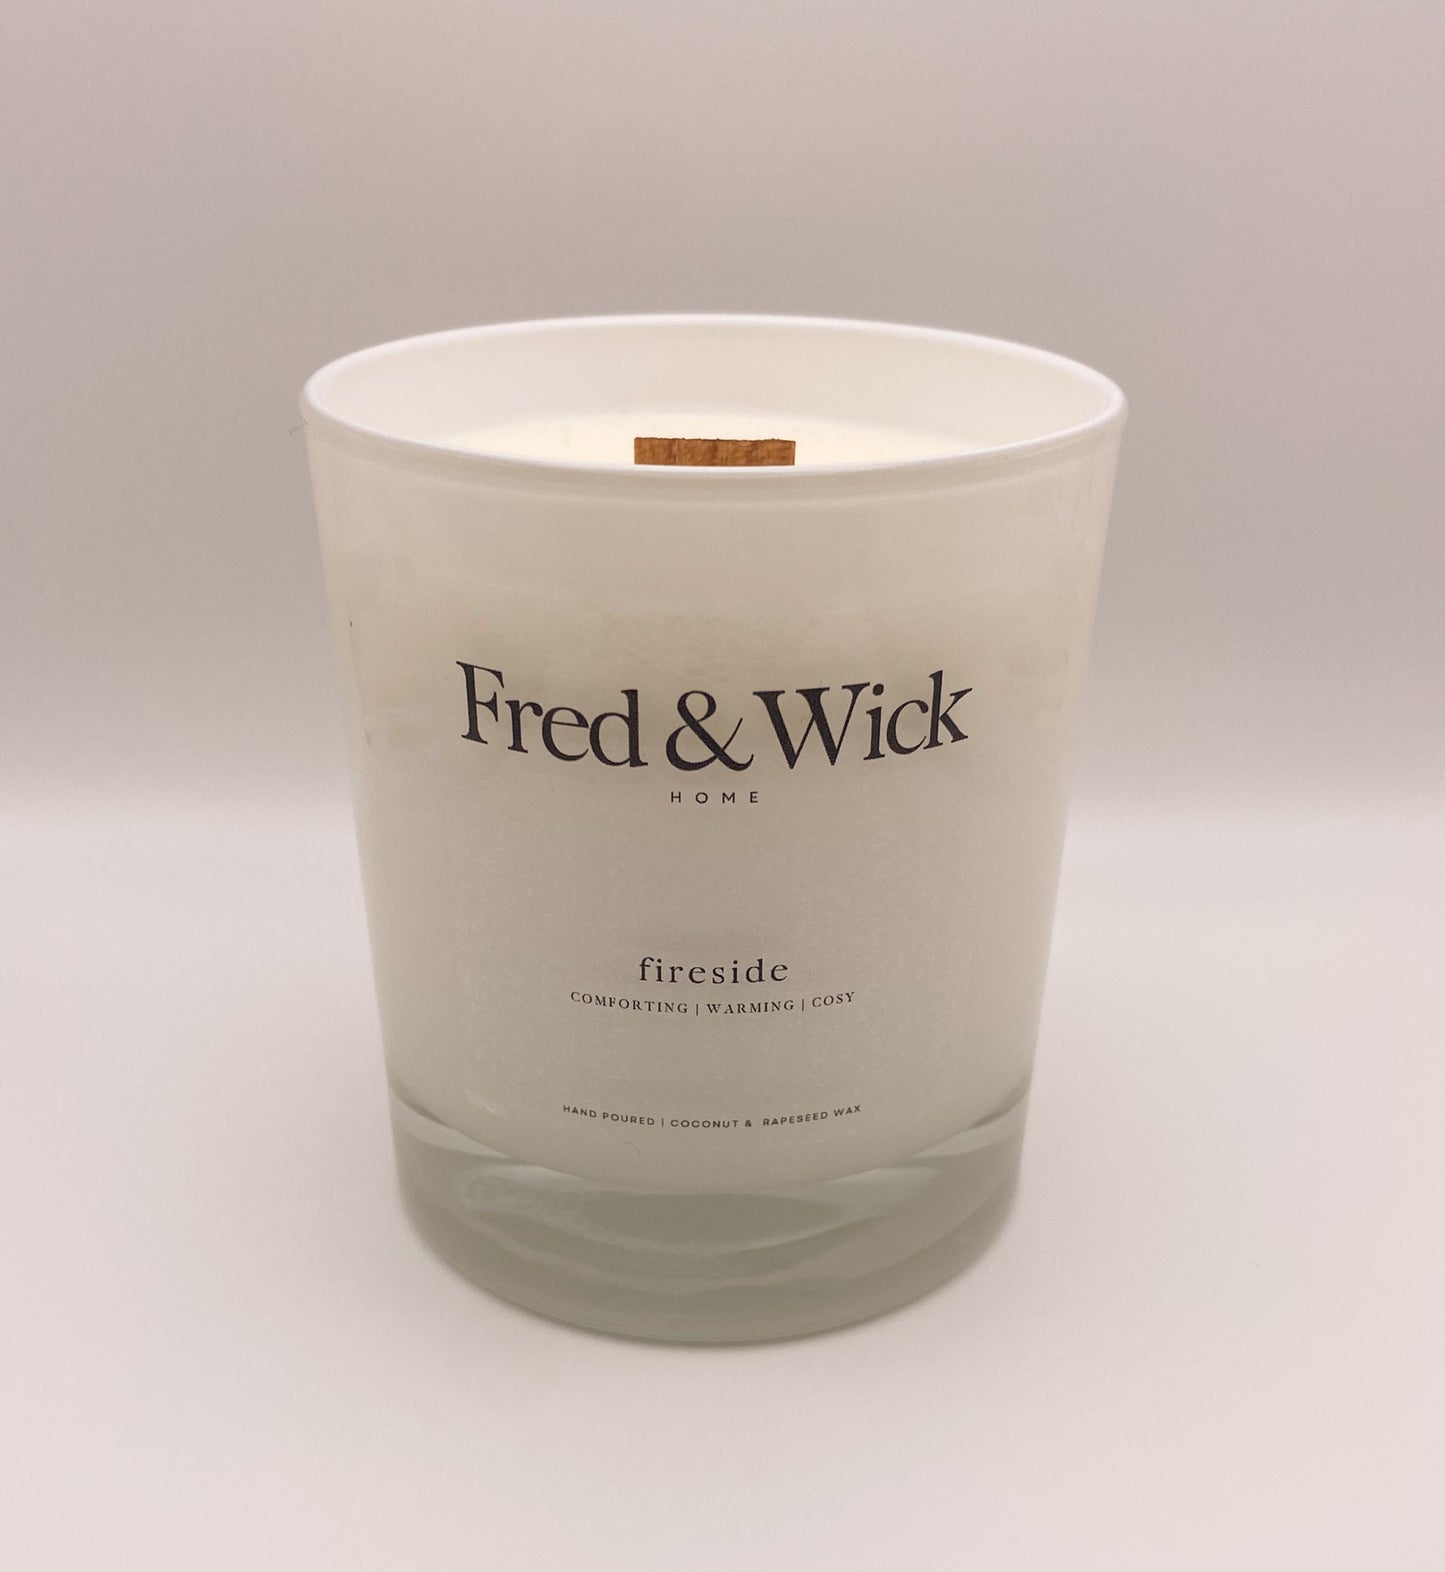 Fireside Candle